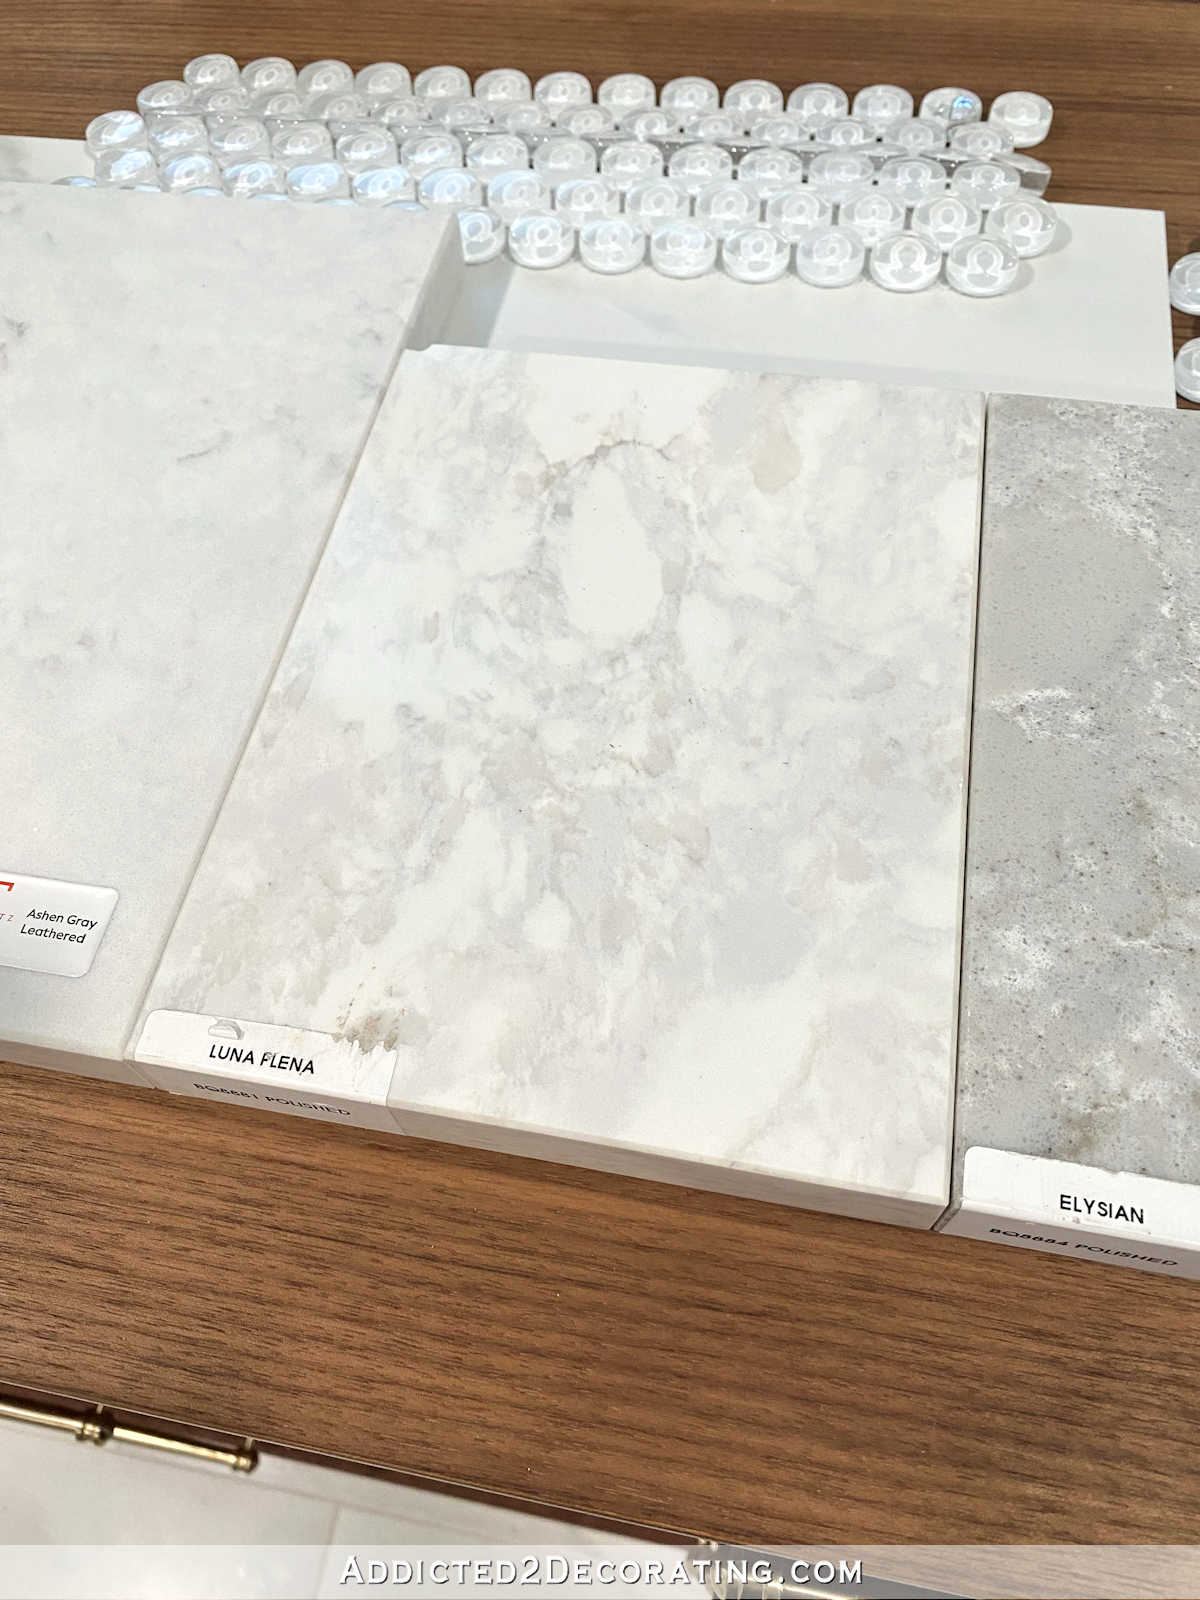 Quartz Countertop Options For Our Bathroom Vanities (Which One Is Your Favorite?)